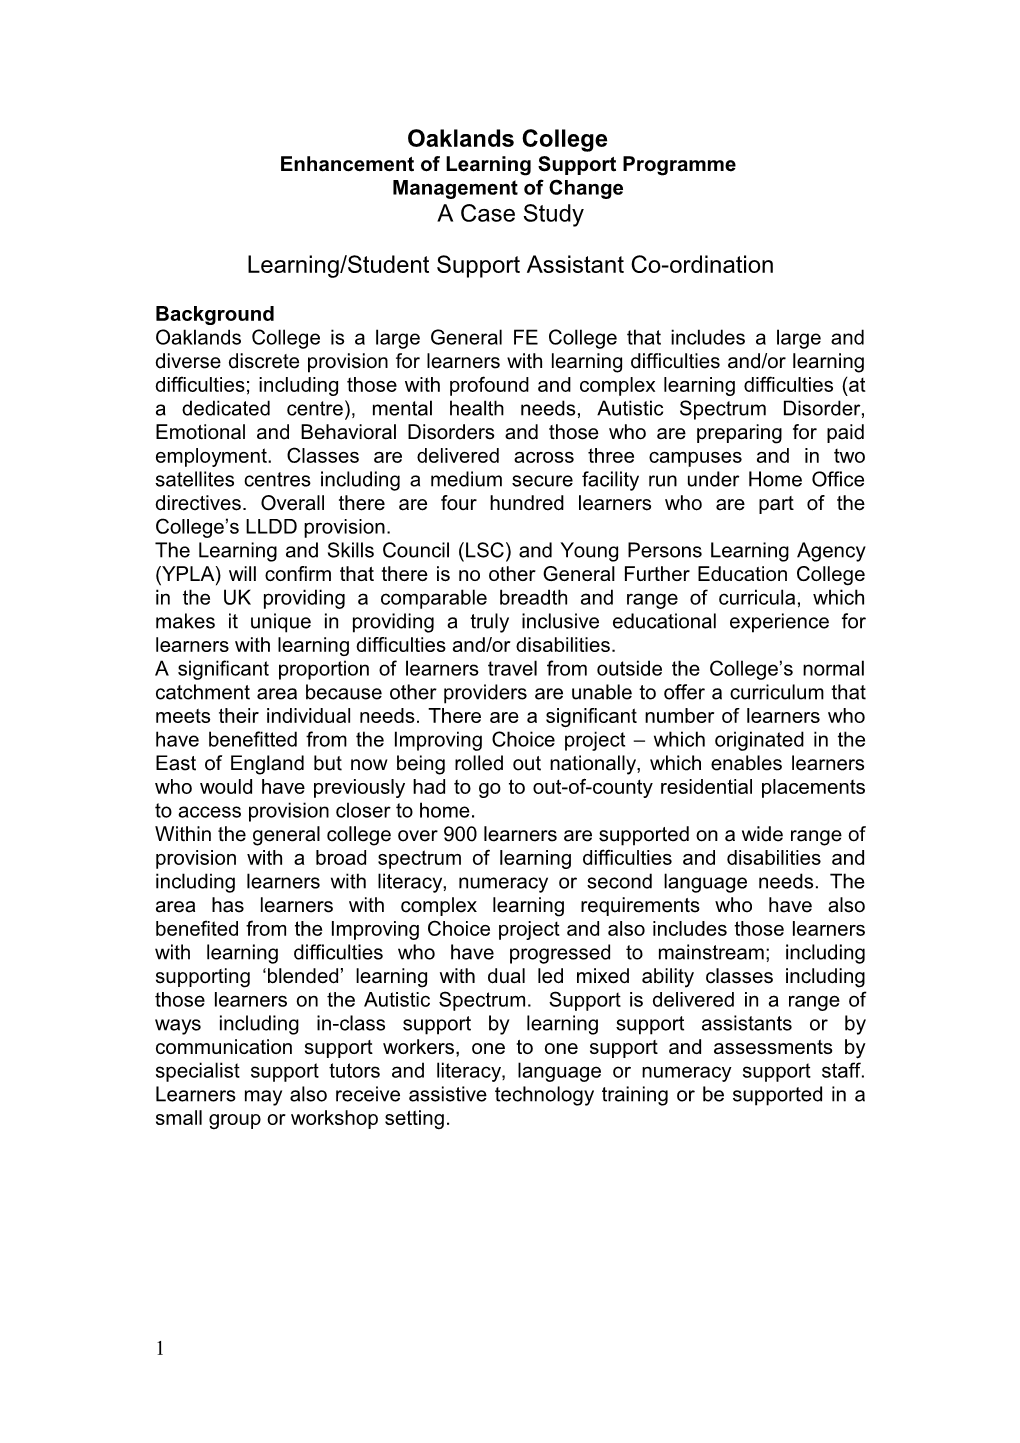 Enhancement of Learning Support Programme